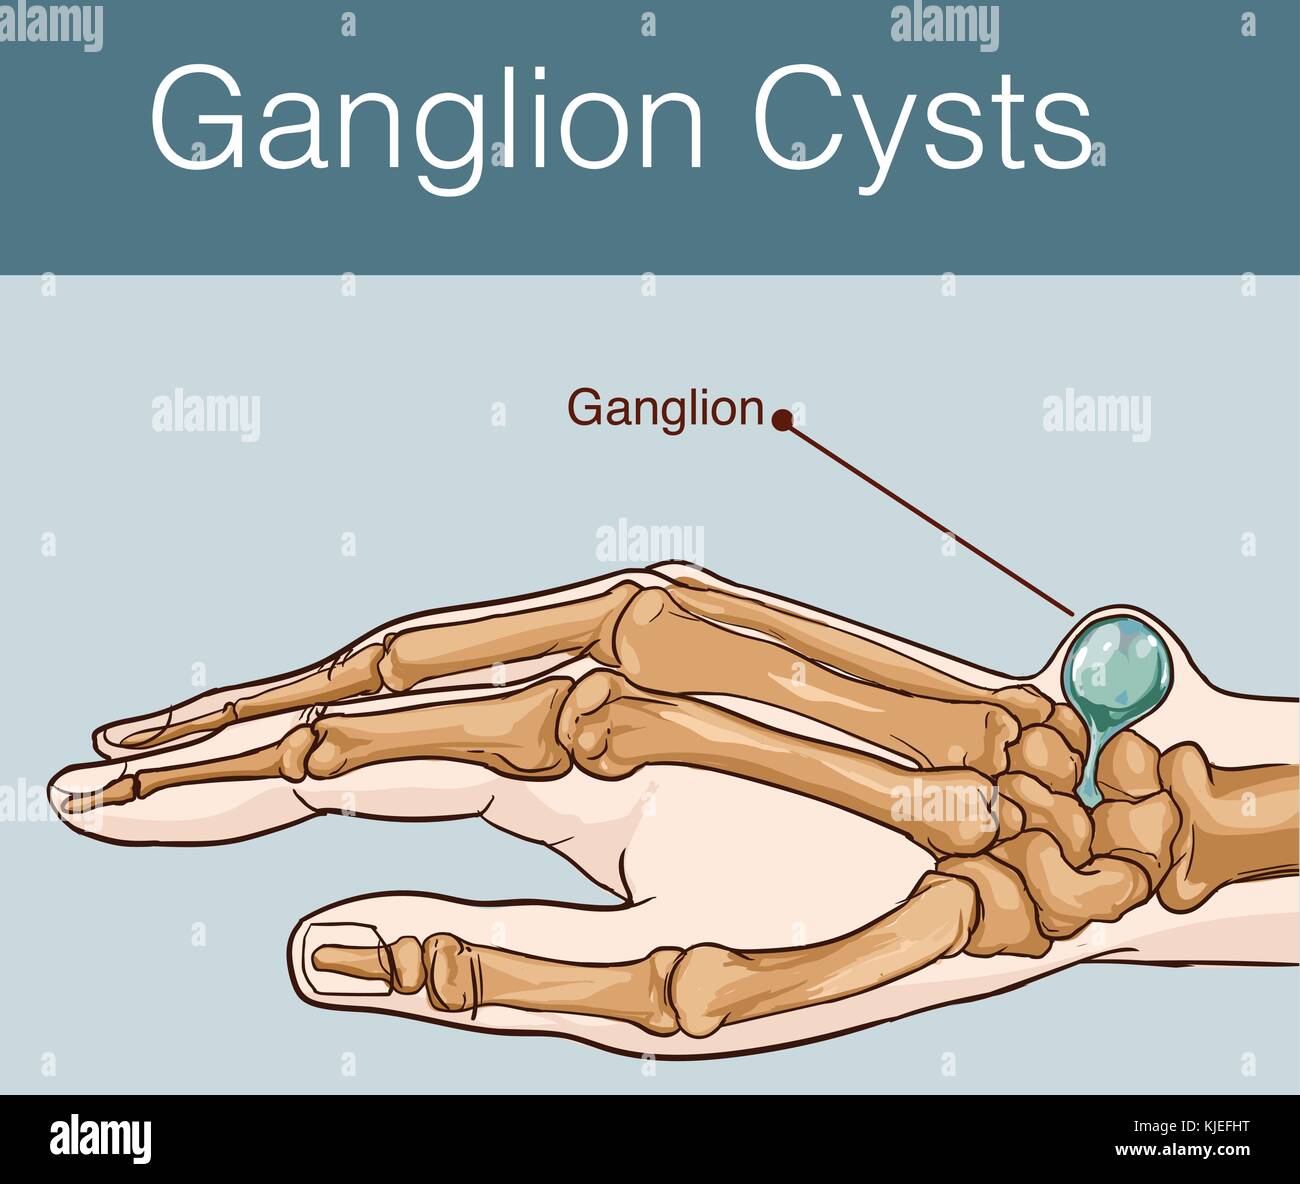 vector illustration of a Ganglion cyst Stock Vector